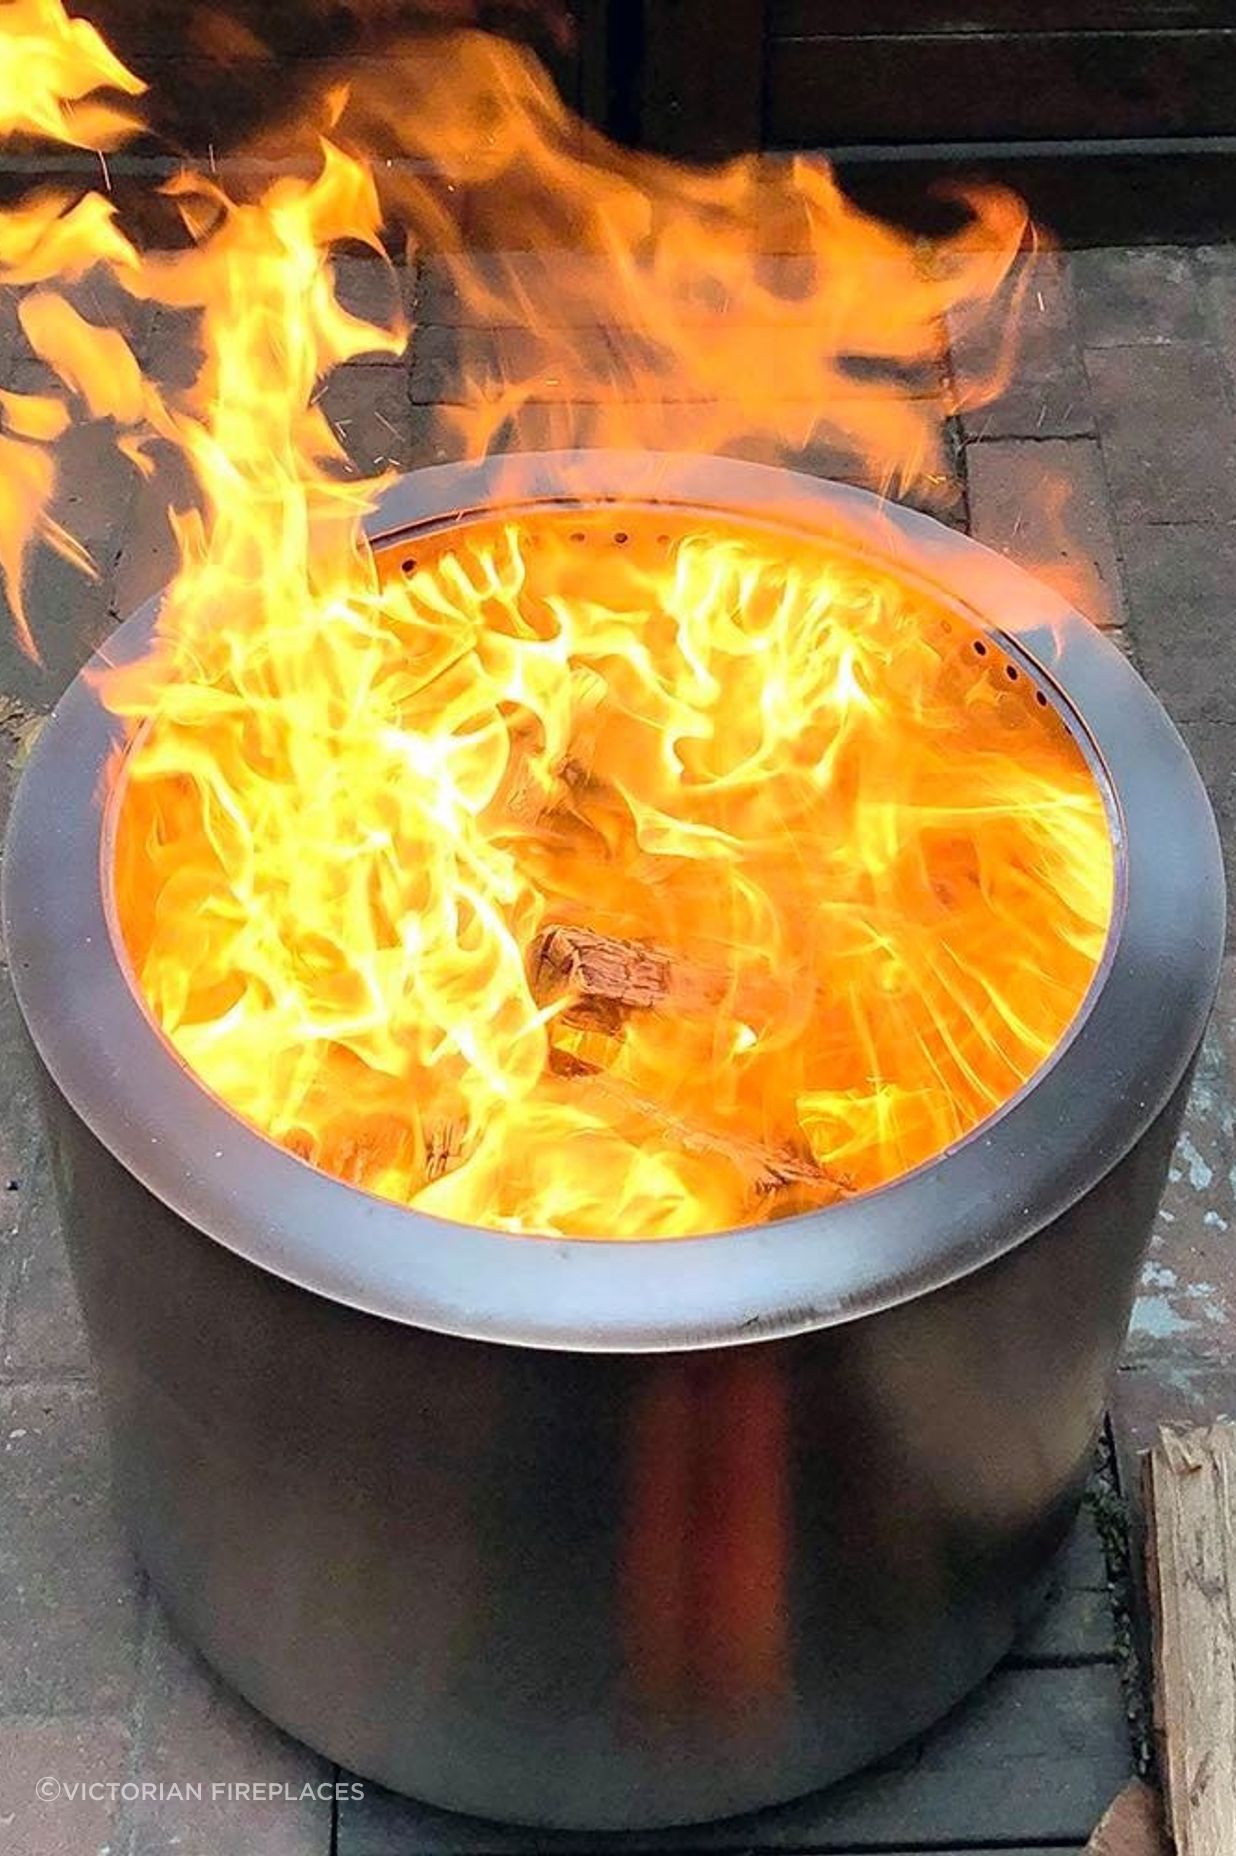 The design of this fire pit helps ensure maximum heat output and minimum smoke.